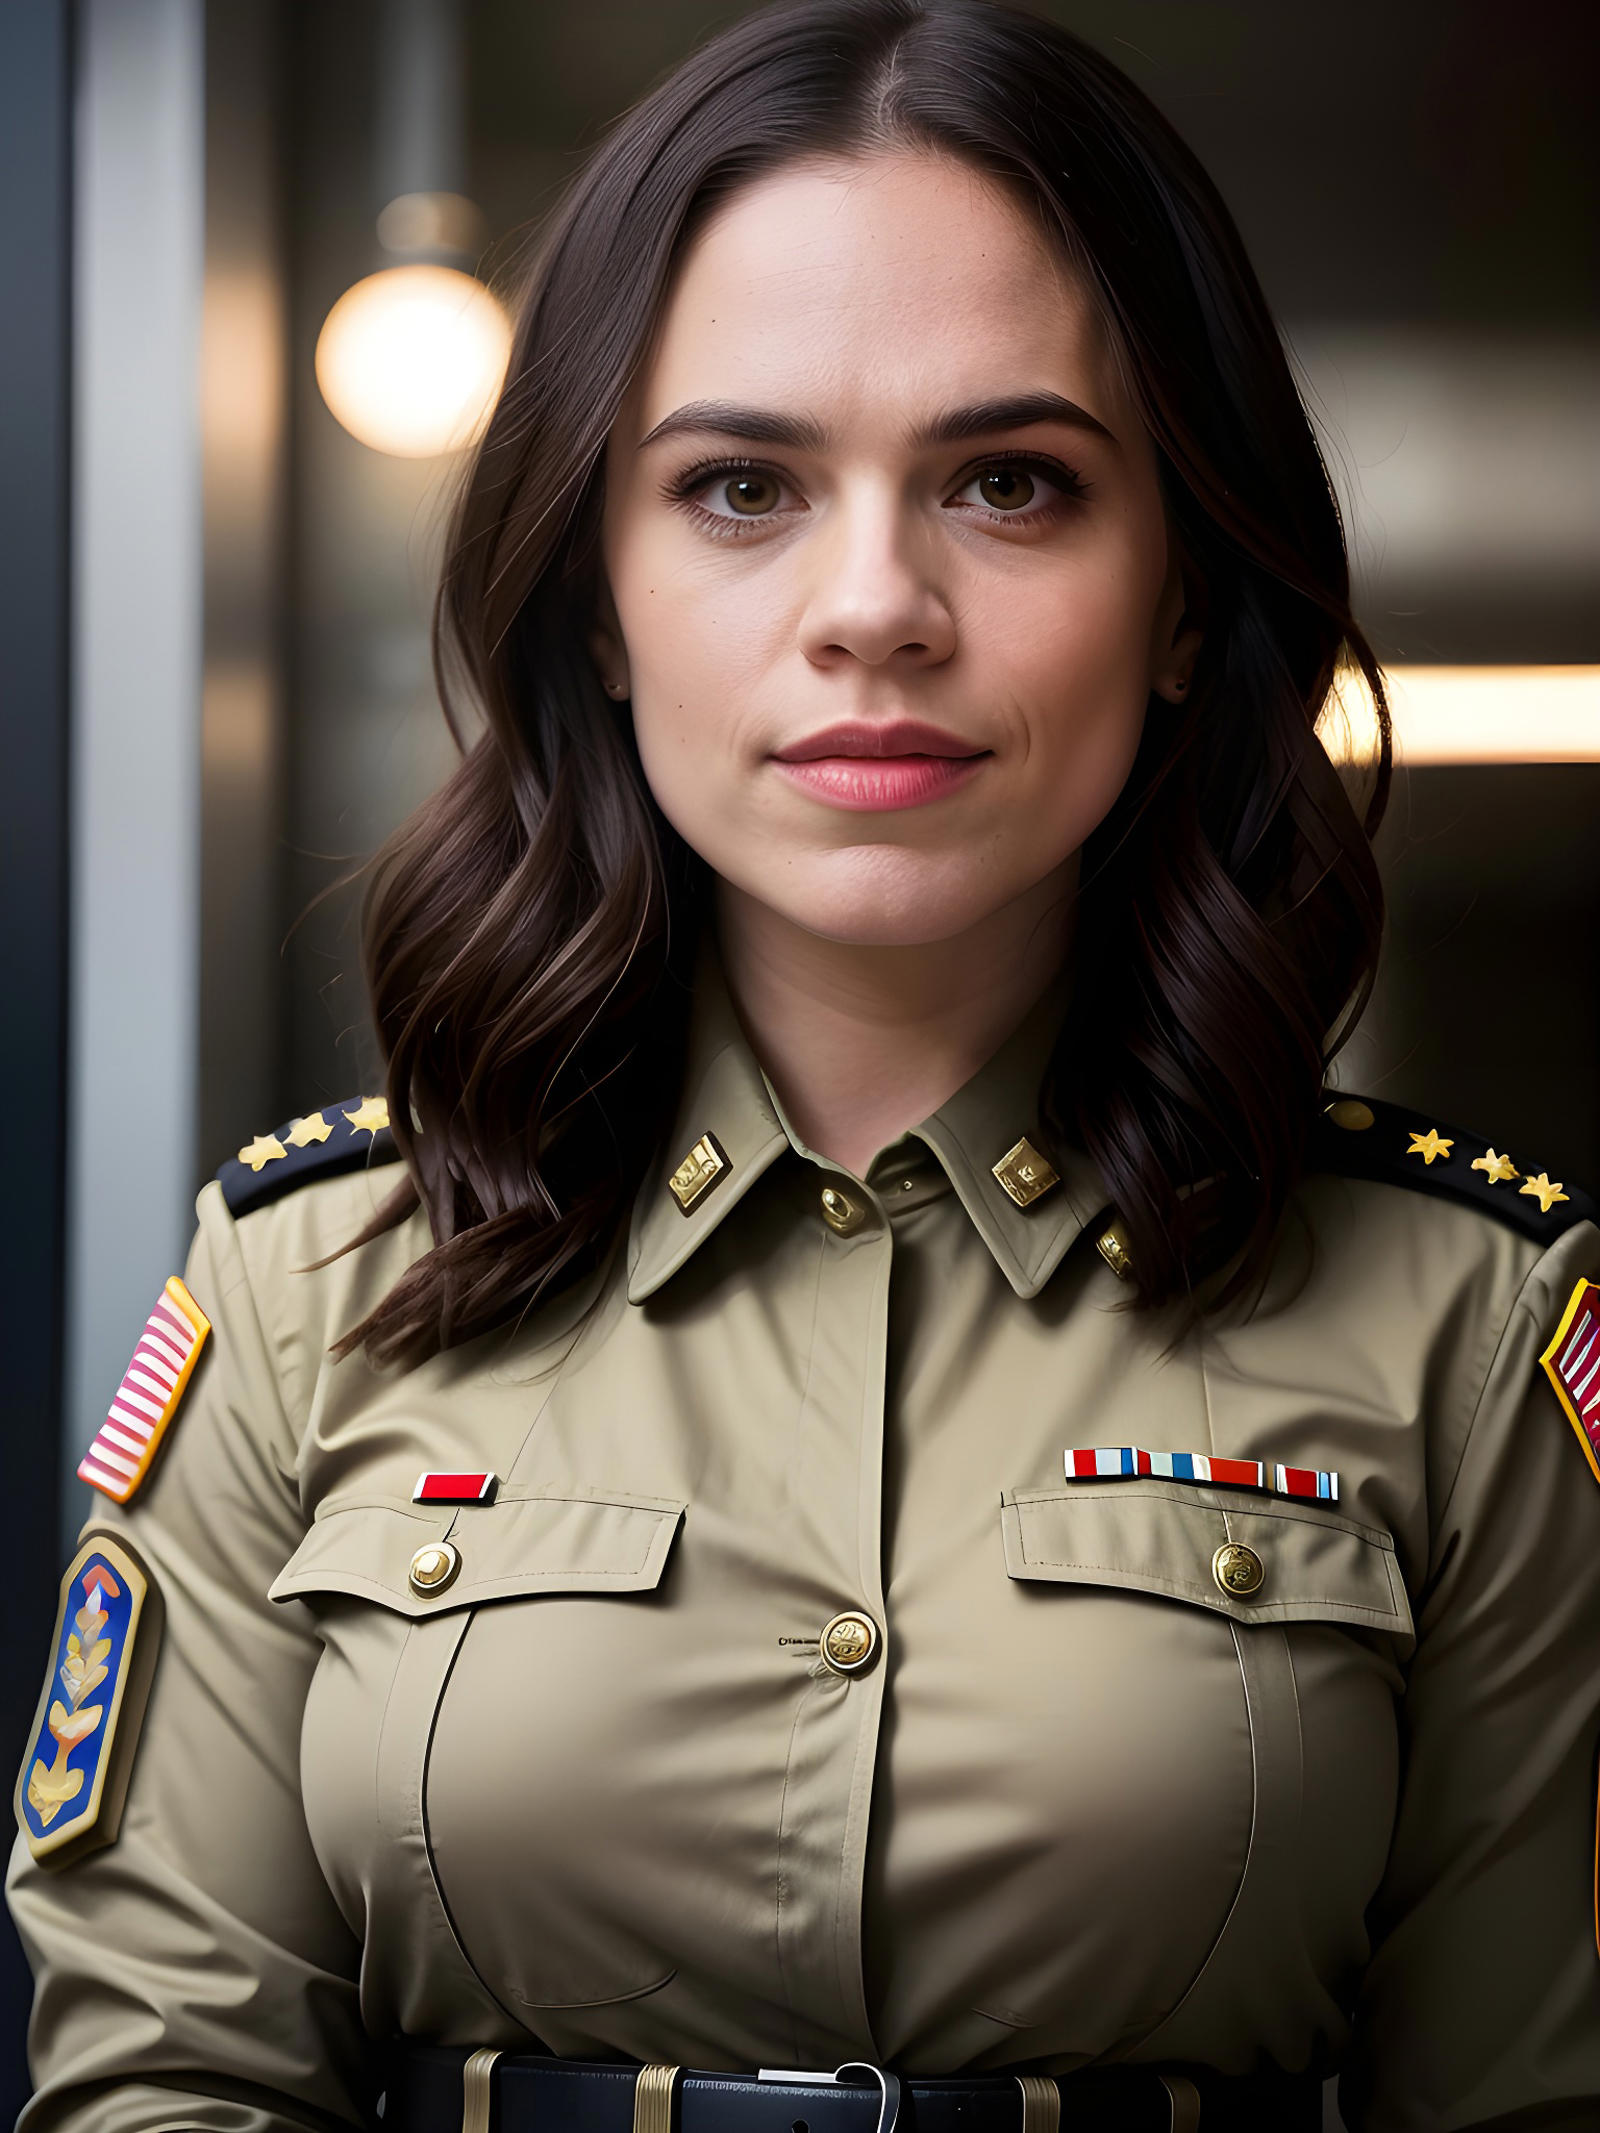 Hayley Atwell image by fraggle